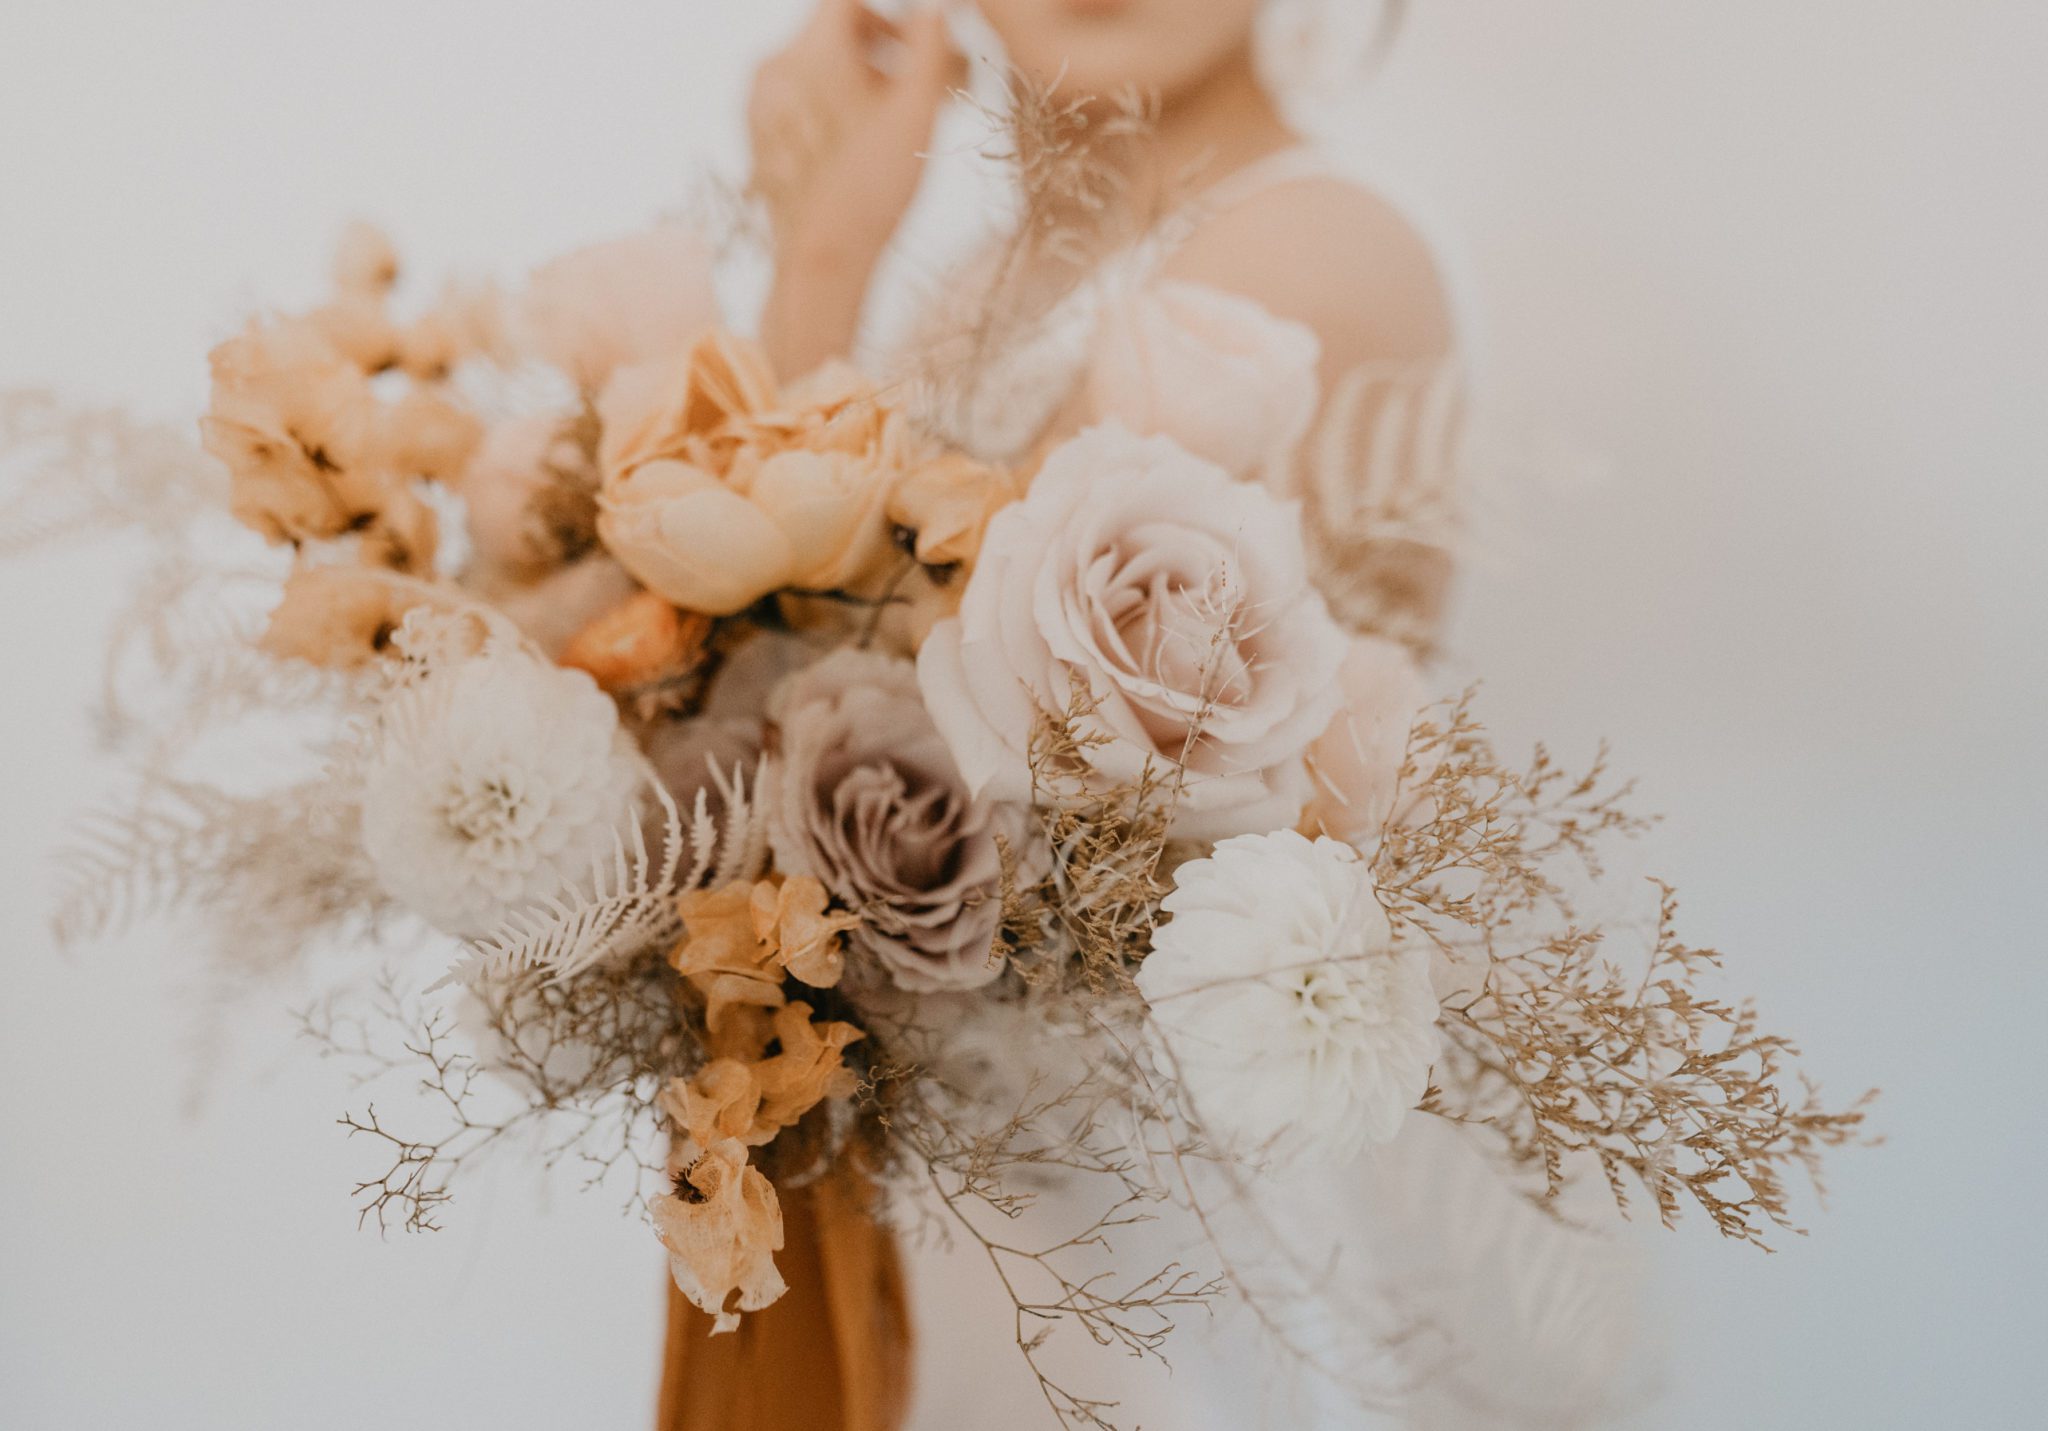 Ochre, toffee and white floral inspiration in dried floral bouquet